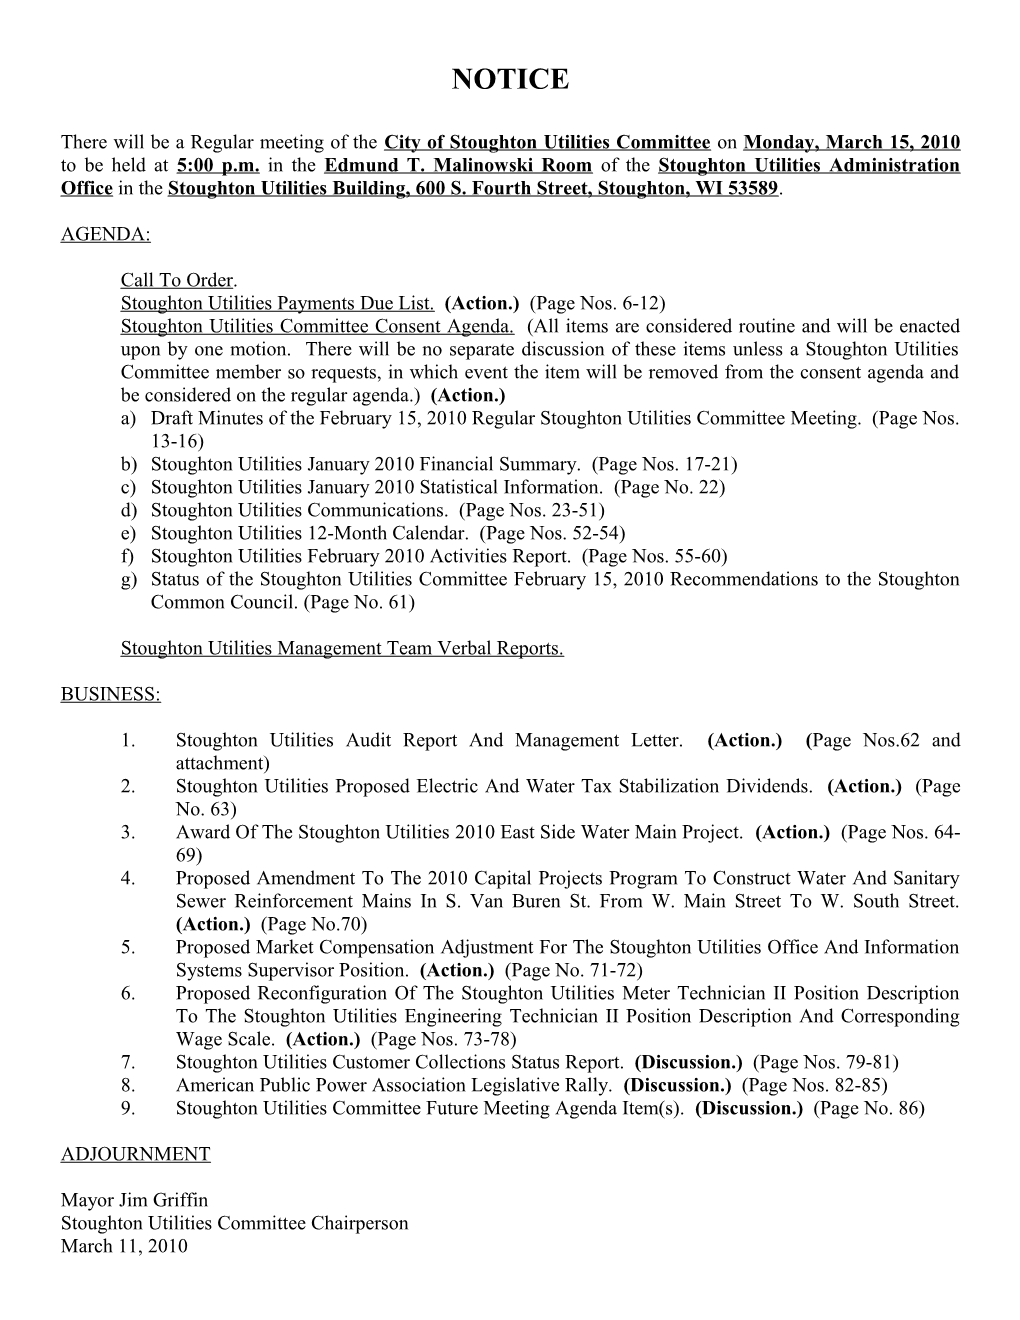 Stoughton Utilities Payments Due List. (Action.) (Page Nos.6-12)